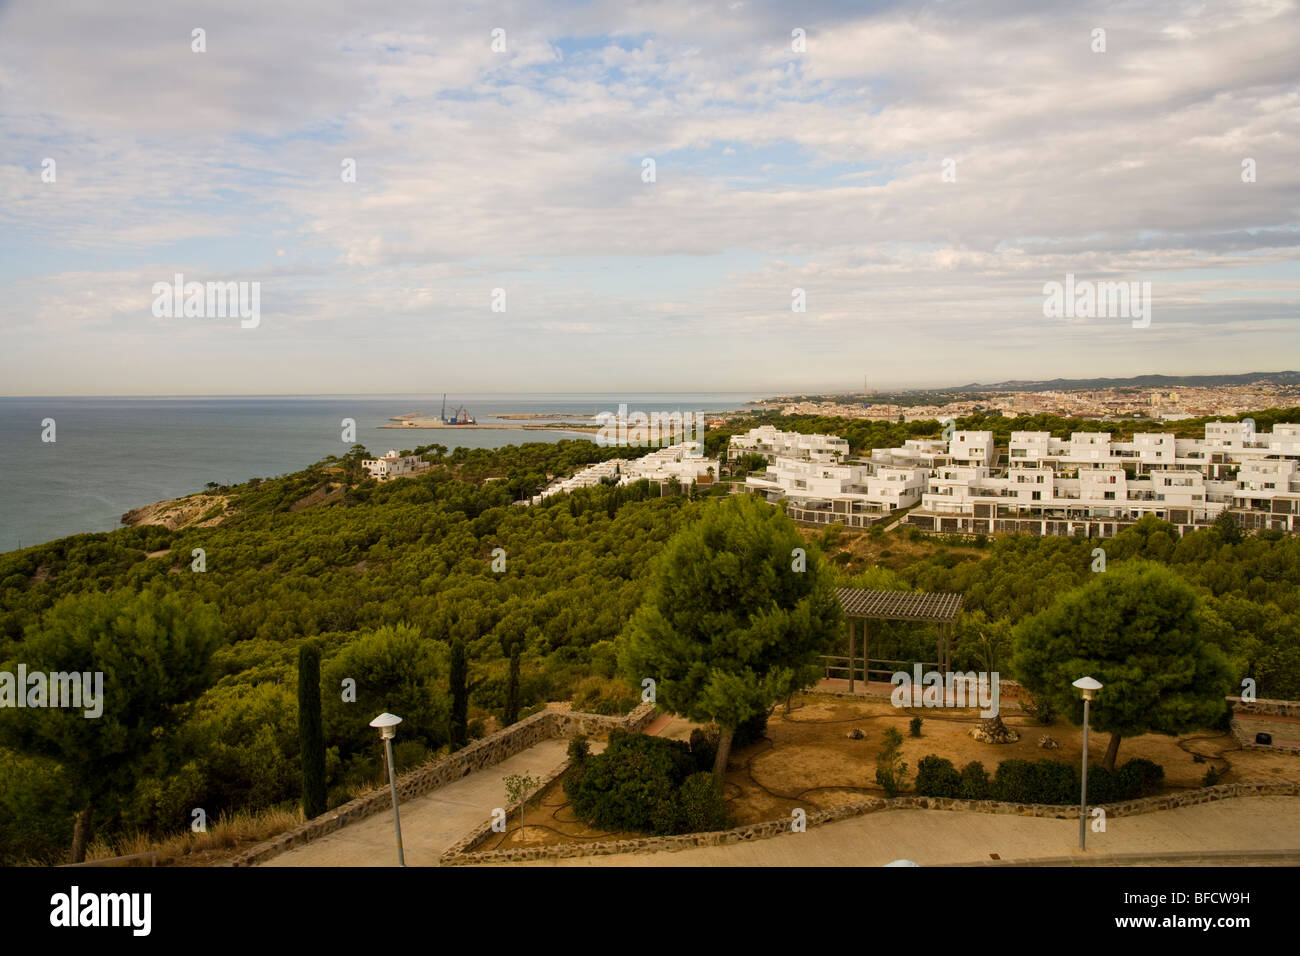 Holiday villas and apartments by the coast in a suburb of Barcelona, Spain. Stock Photo